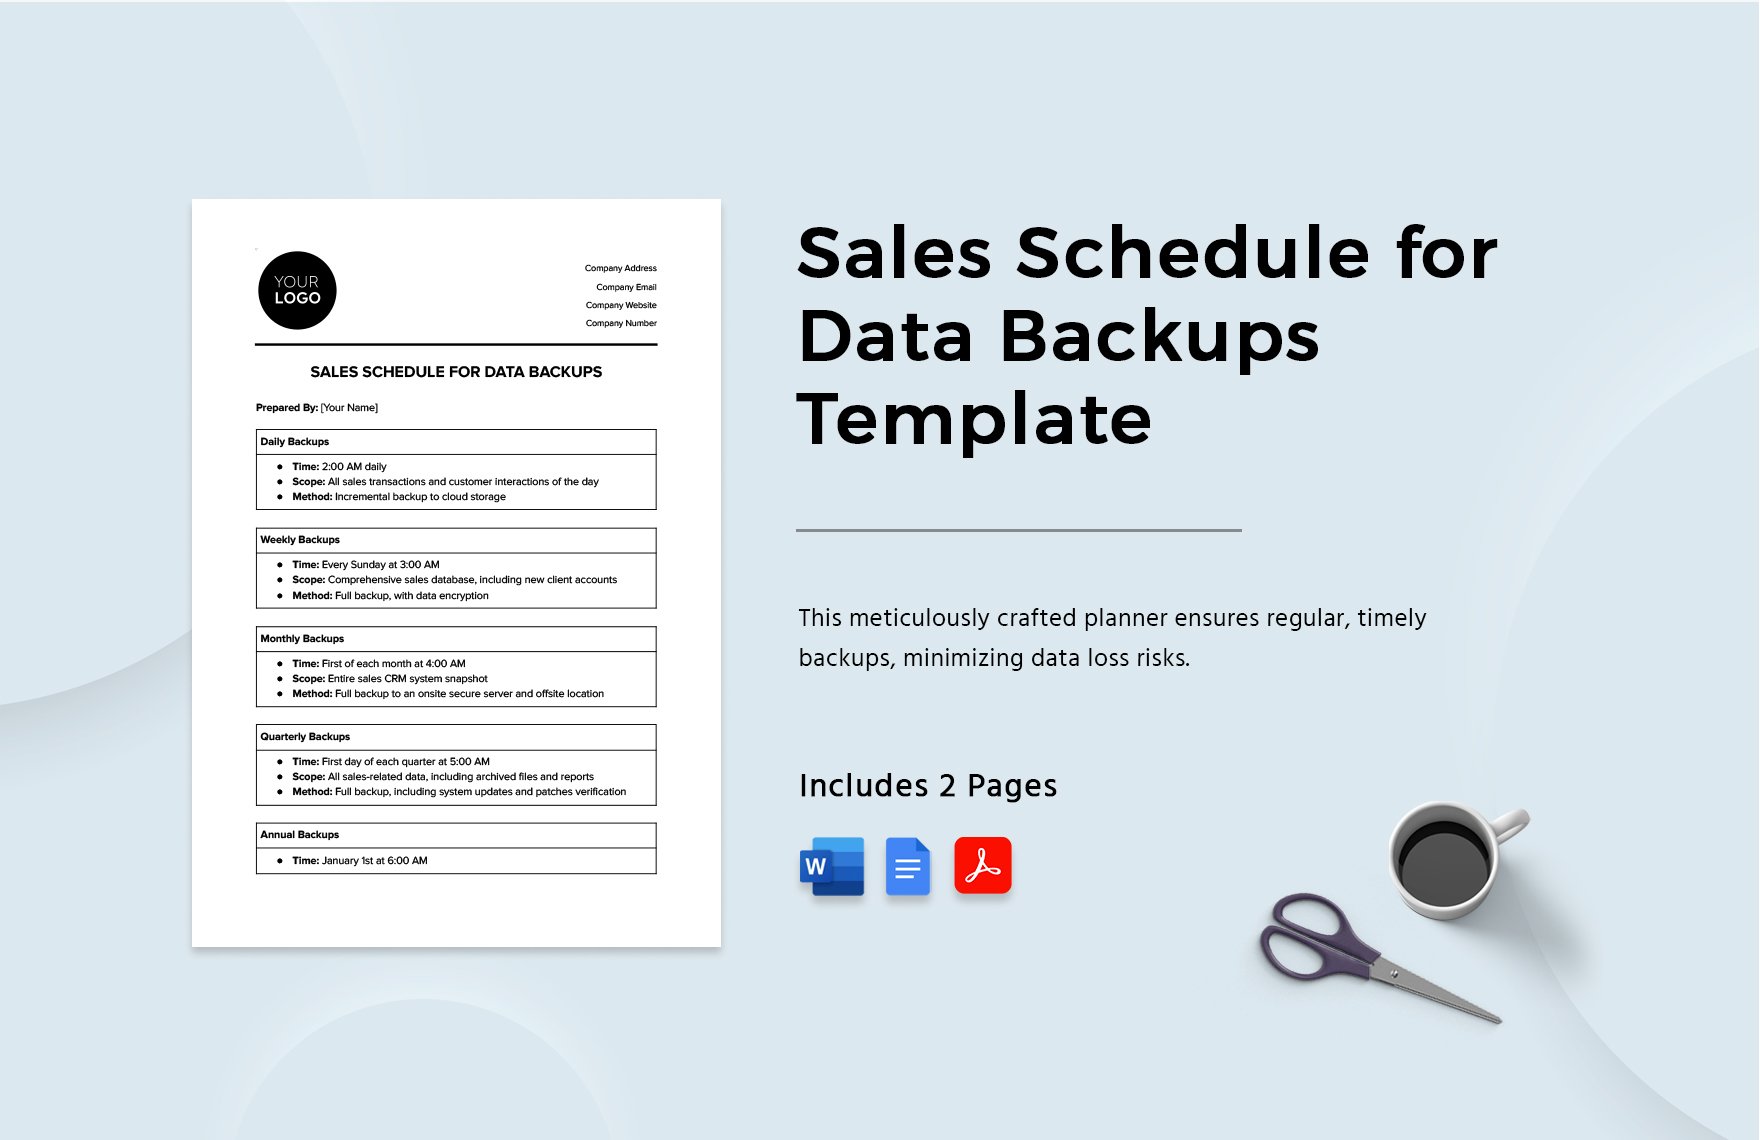 Sales Schedule for Data Backups Template in Word, Google Docs, PDF